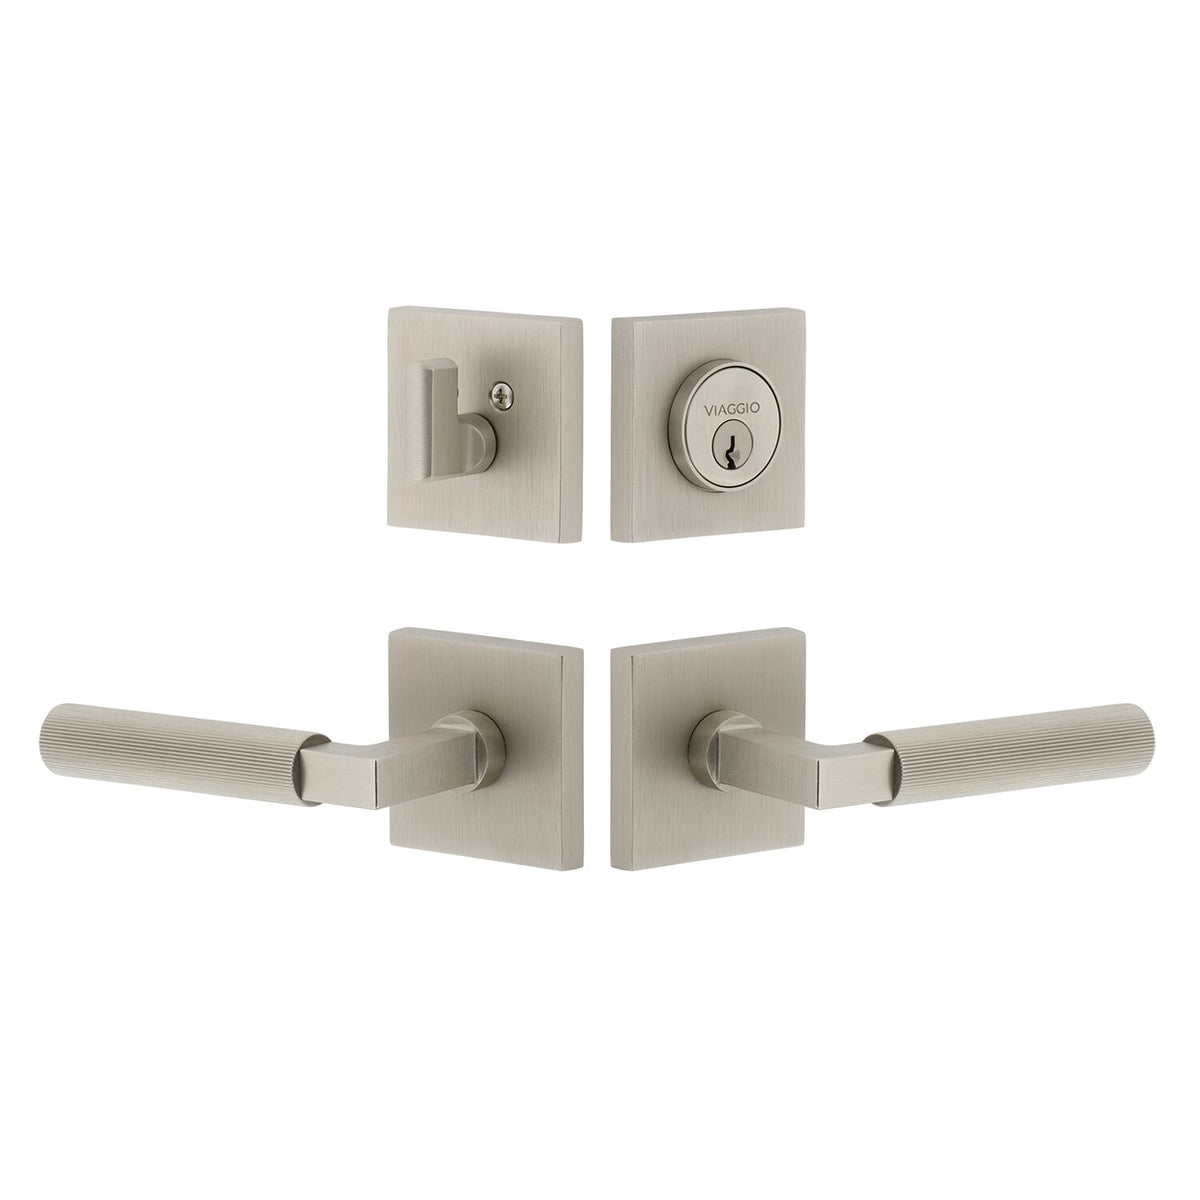 Quadrato Rosette Entry Set with Contempo Fluted Lever  in Satin Nickel